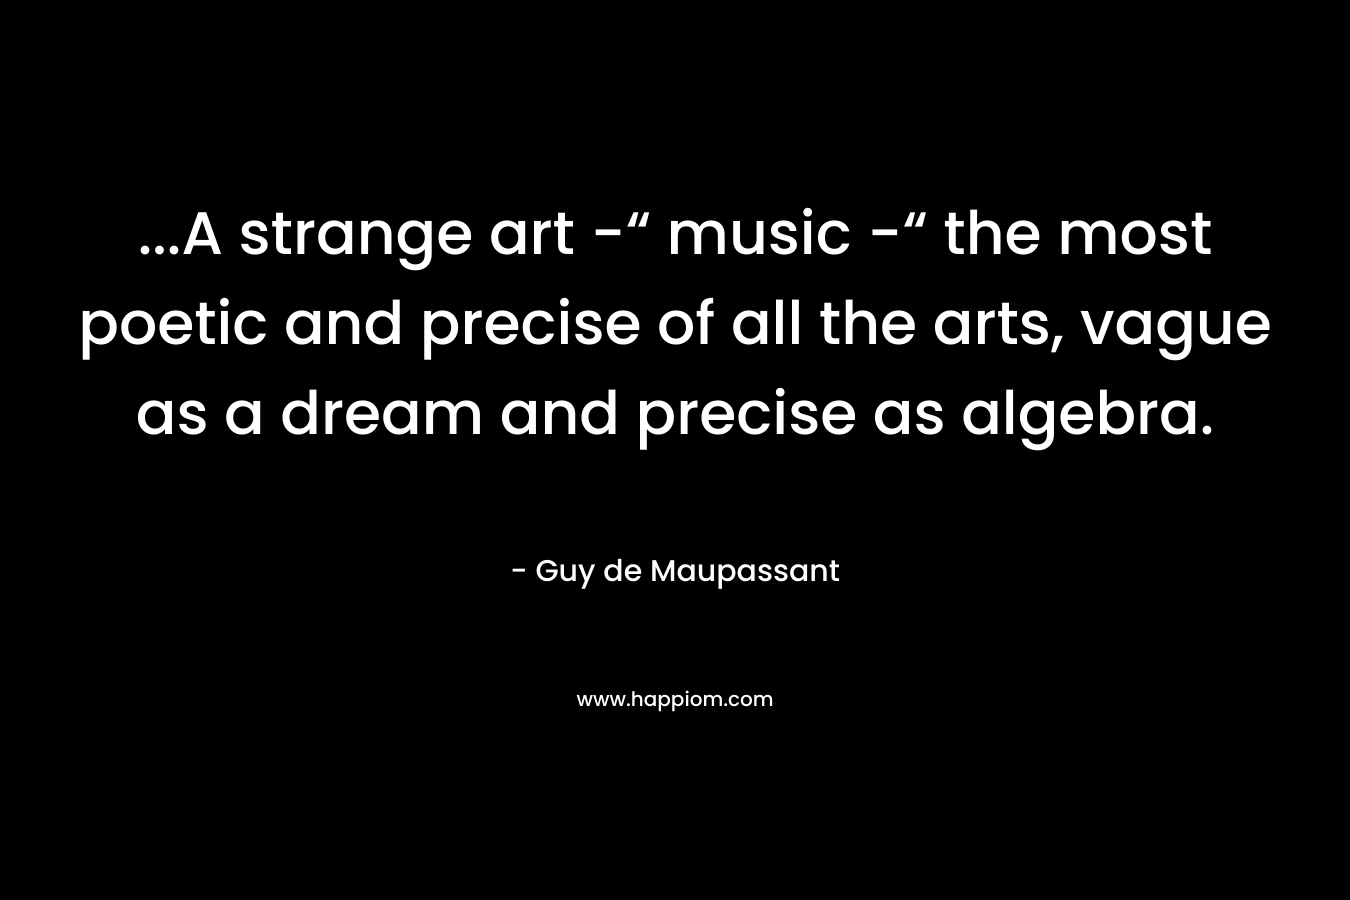 ...A strange art -“ music -“ the most poetic and precise of all the arts, vague as a dream and precise as algebra.